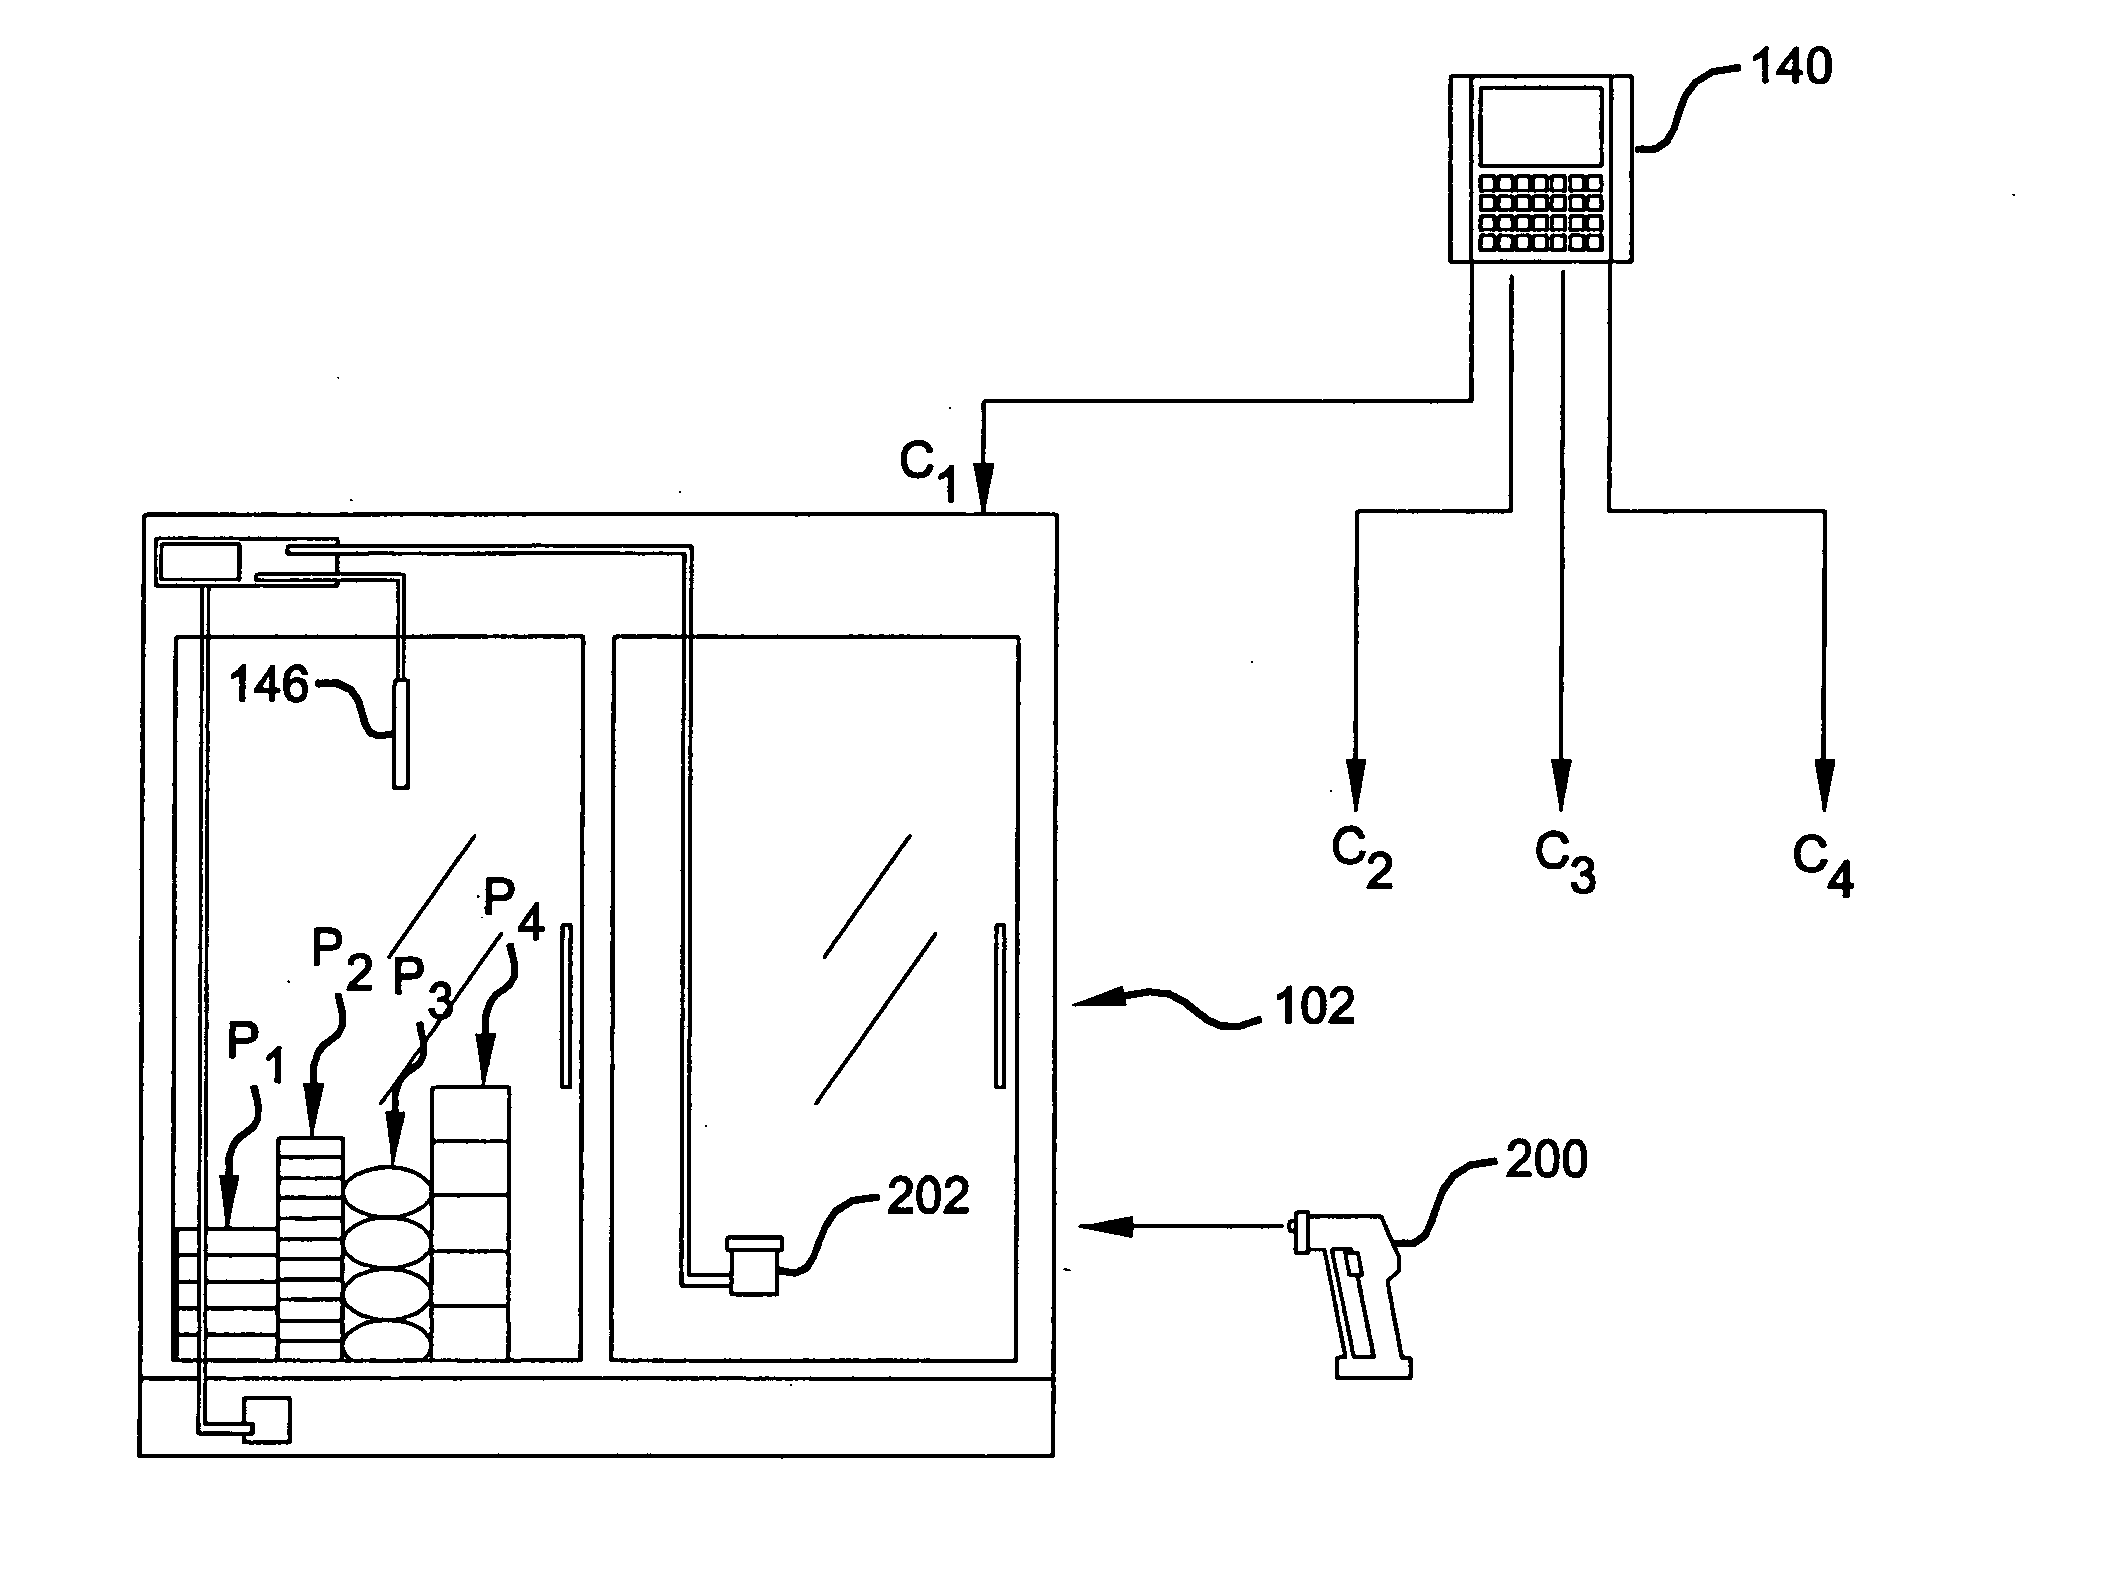 System for remote refrigeration monitoring and diagnostics